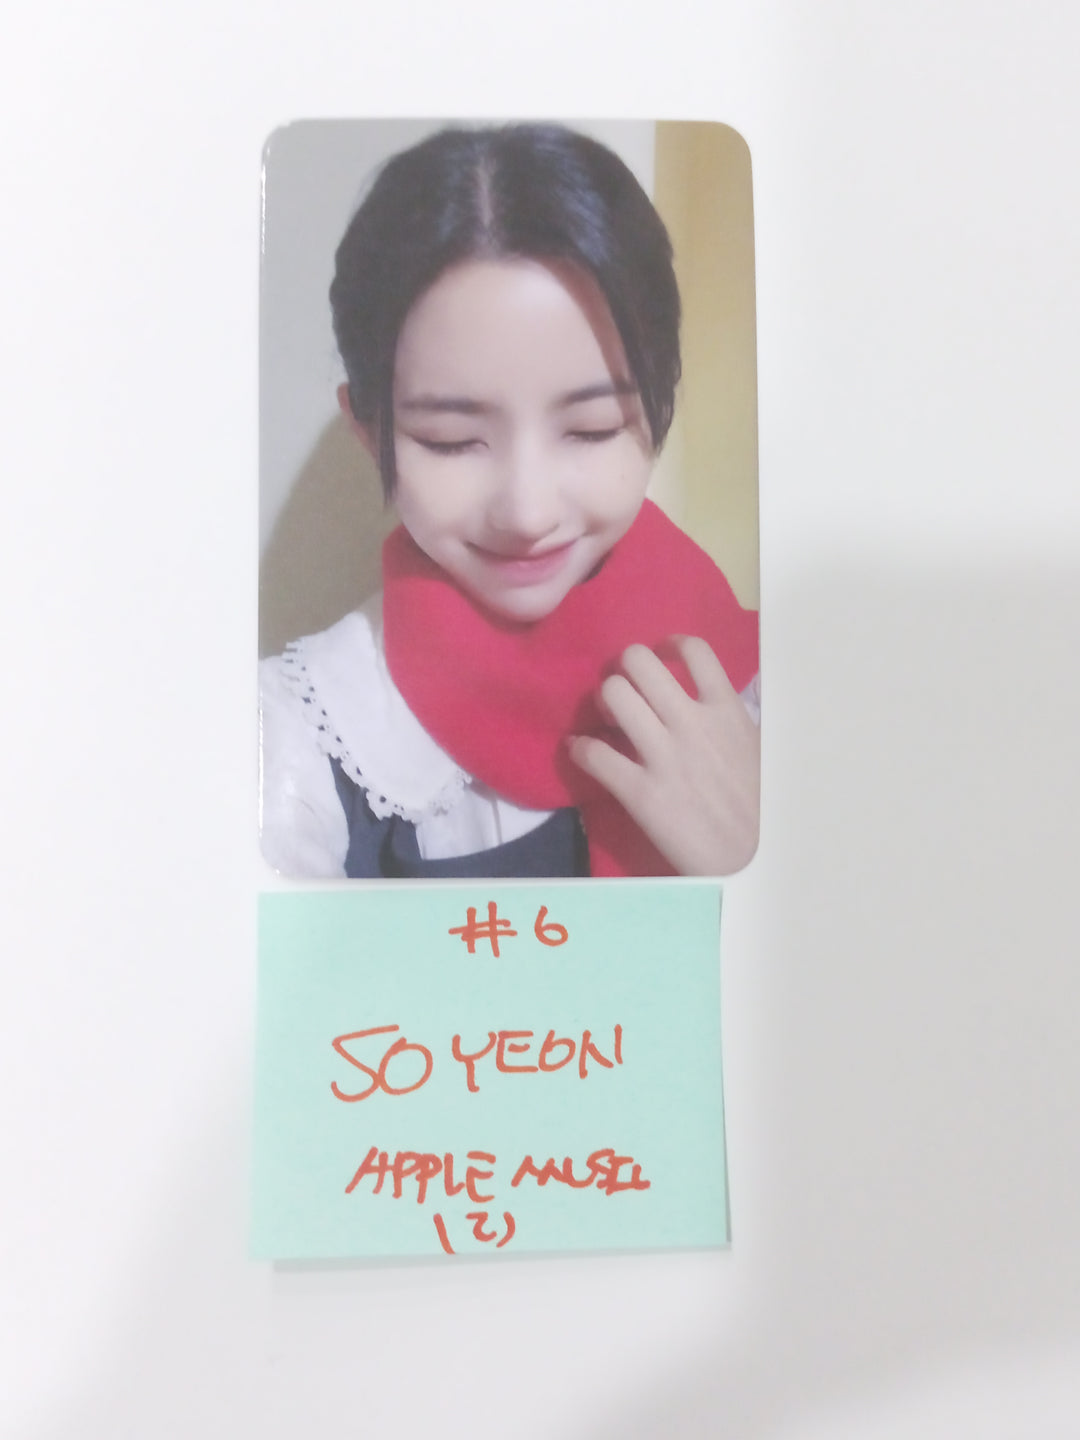 (g) I-DLE "2" 2nd Full Album - Apple Music Fansign Event Photocard Round 2 [24.3.28]